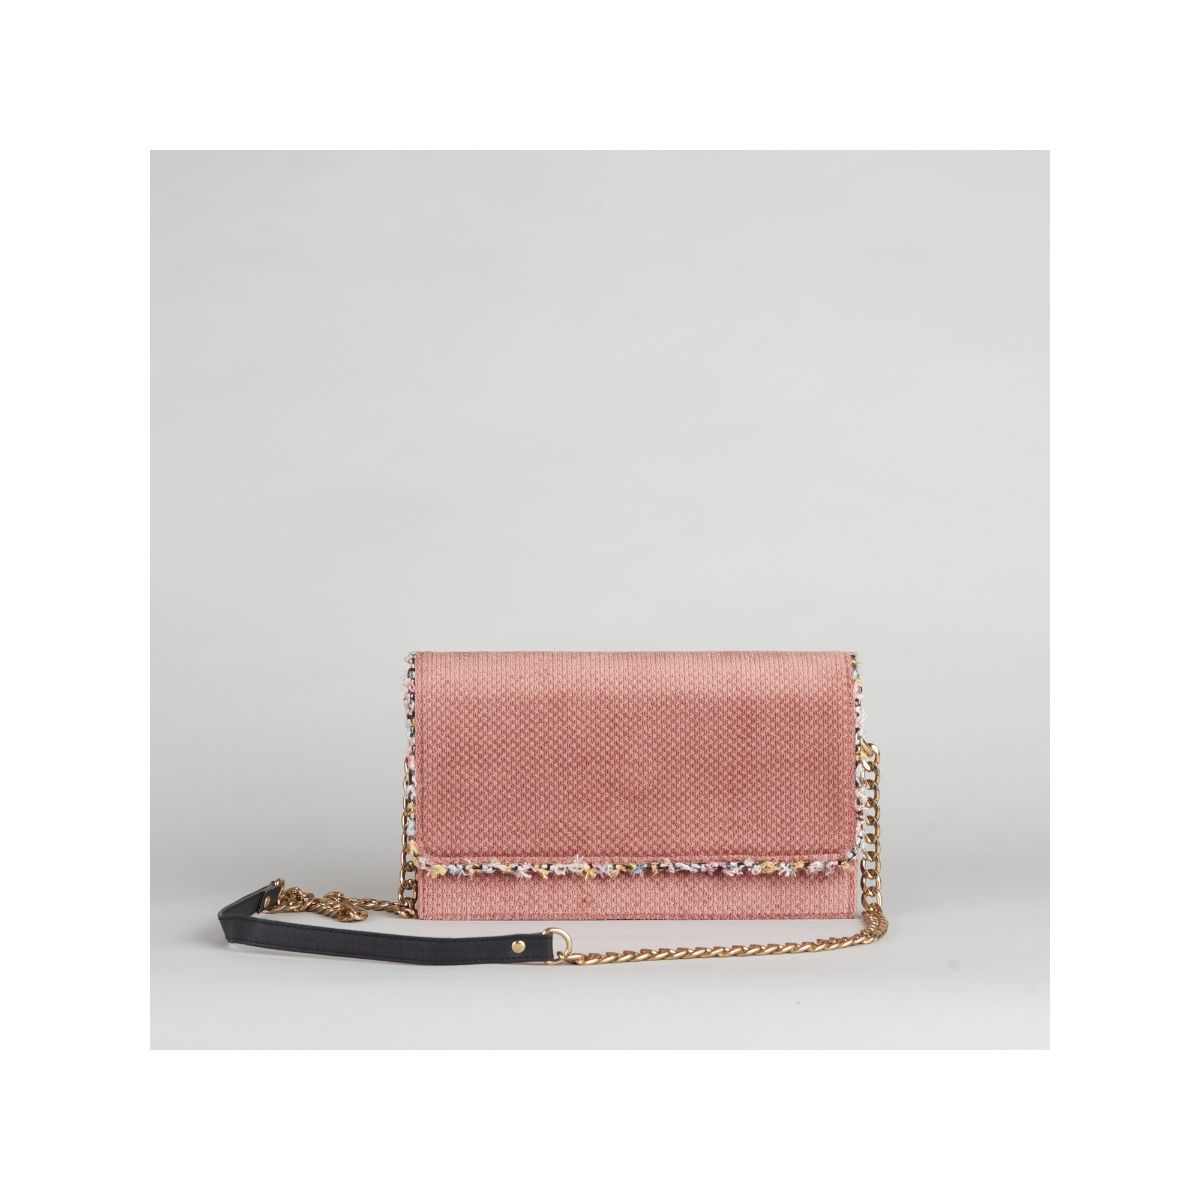 ETCETERA Women Pink Textured Velvet Sling Bag (Pink) At Nykaa, Best Beauty Products Online